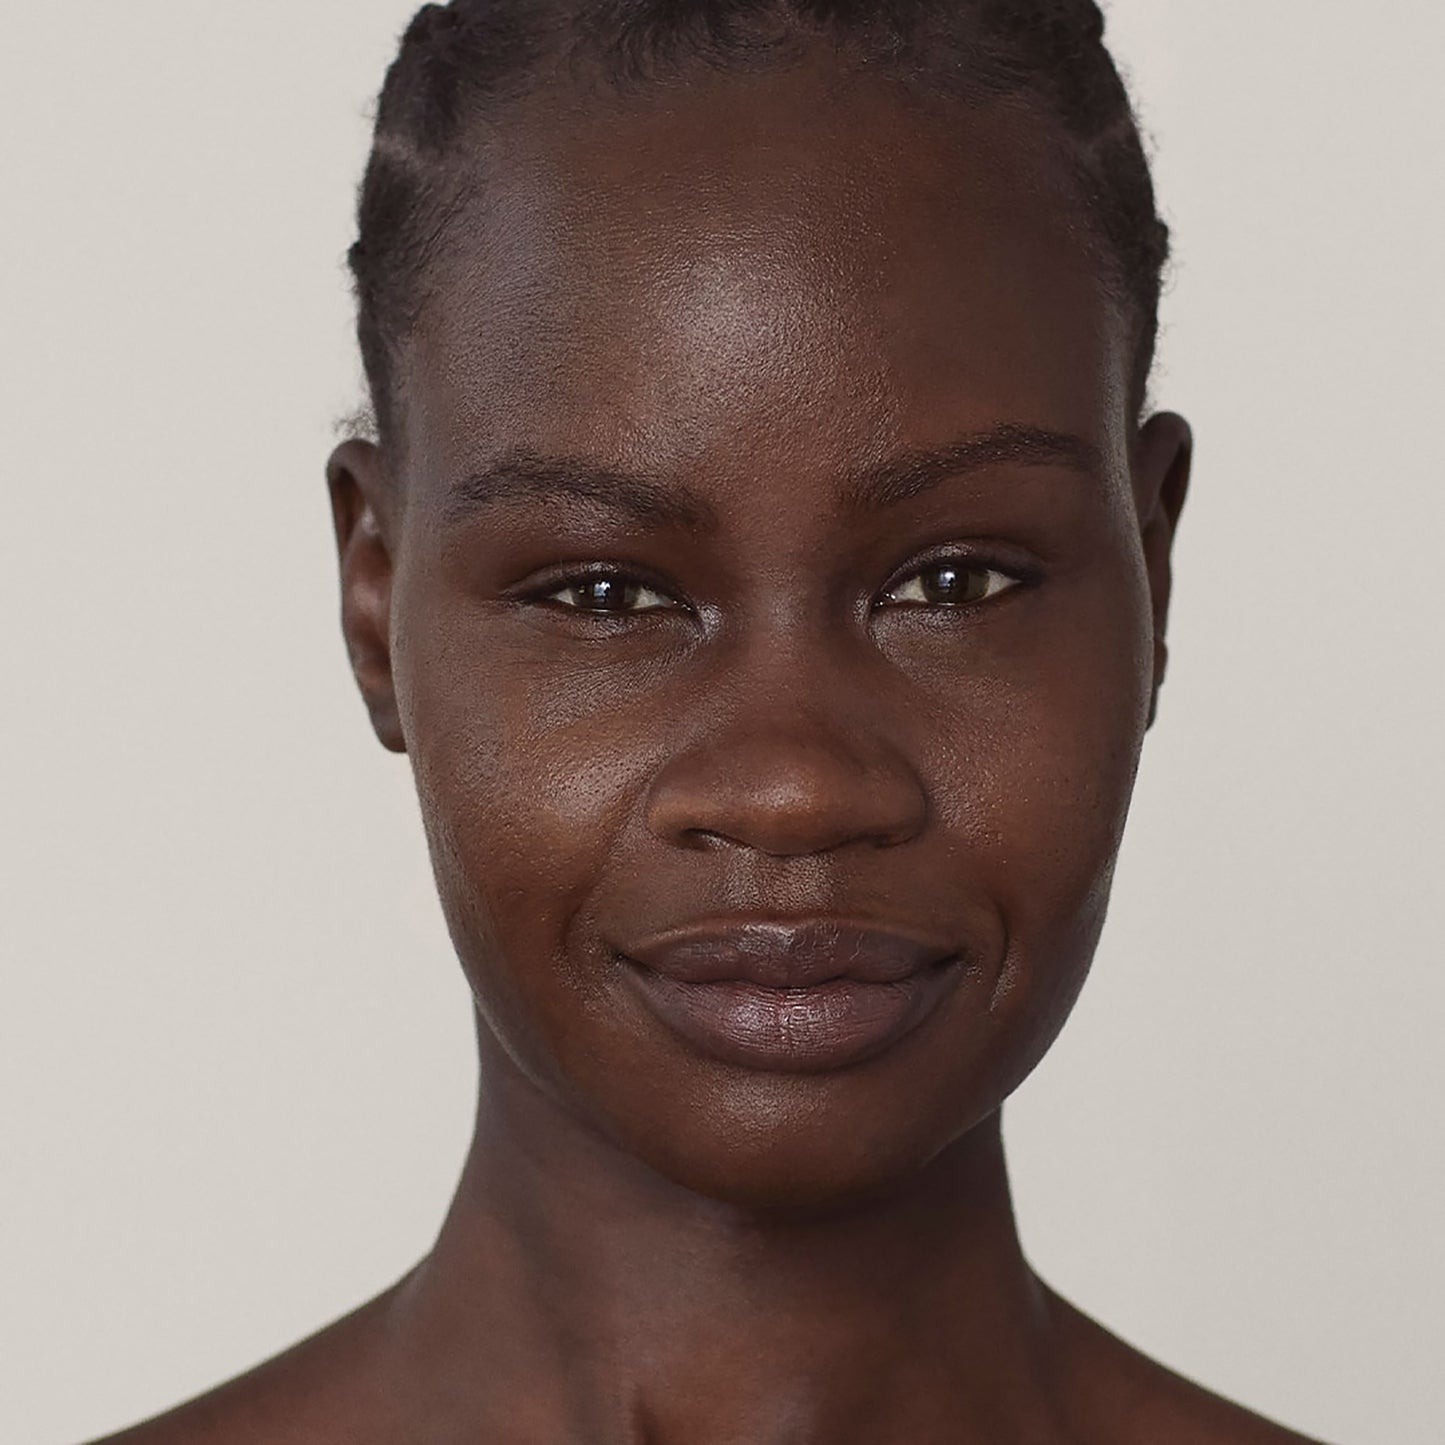 A photo of a person’s face, with deep warm skin tone